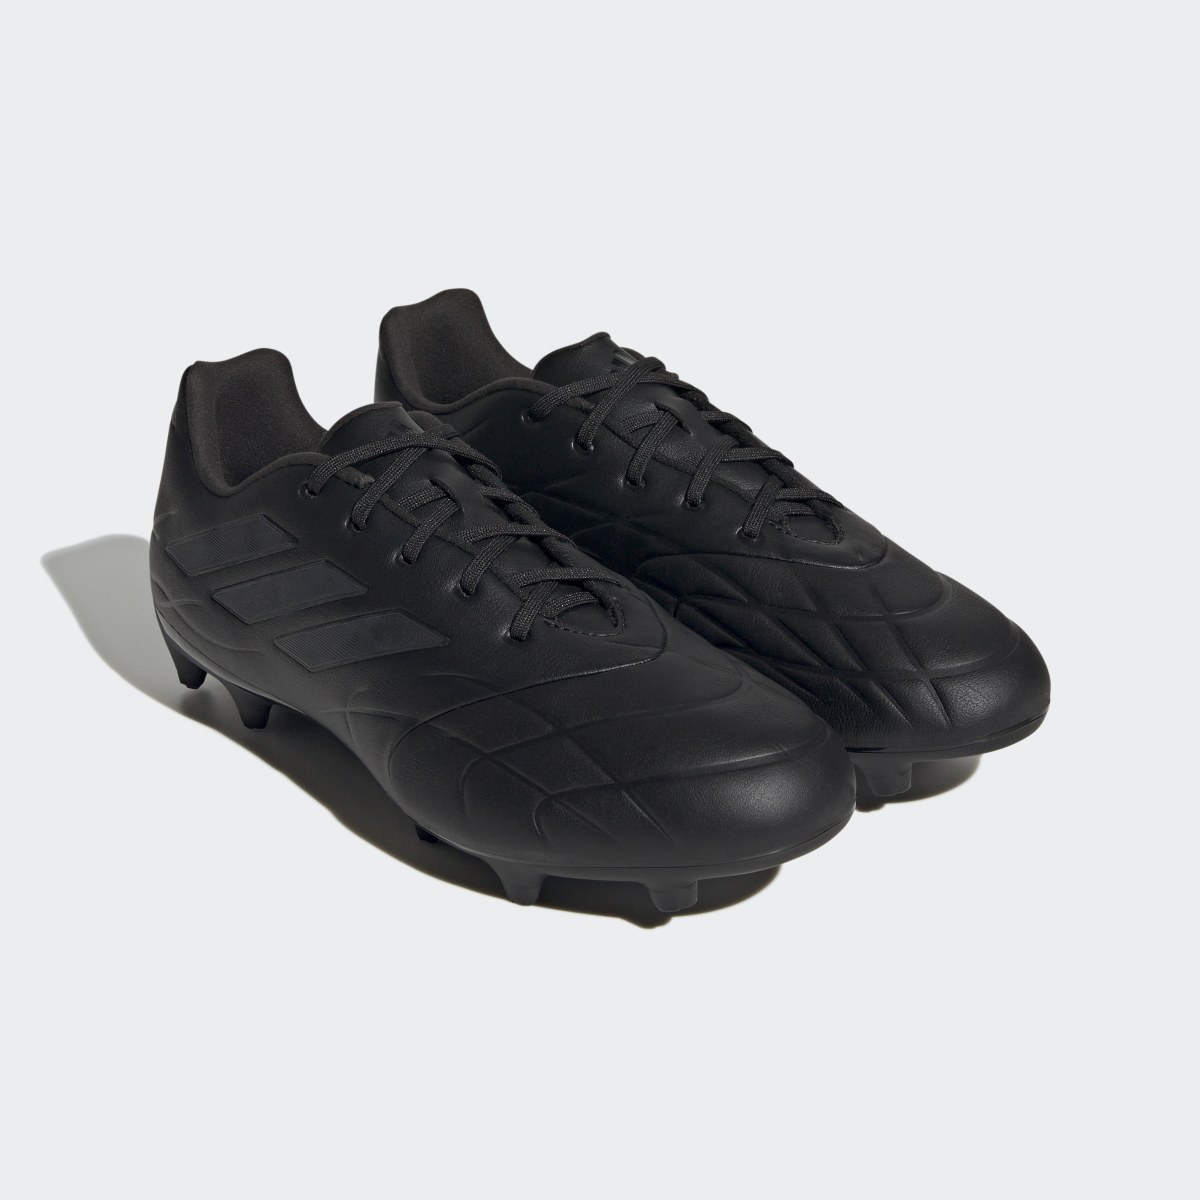 Adidas Copa Pure.3 Firm Ground Cleats. 5